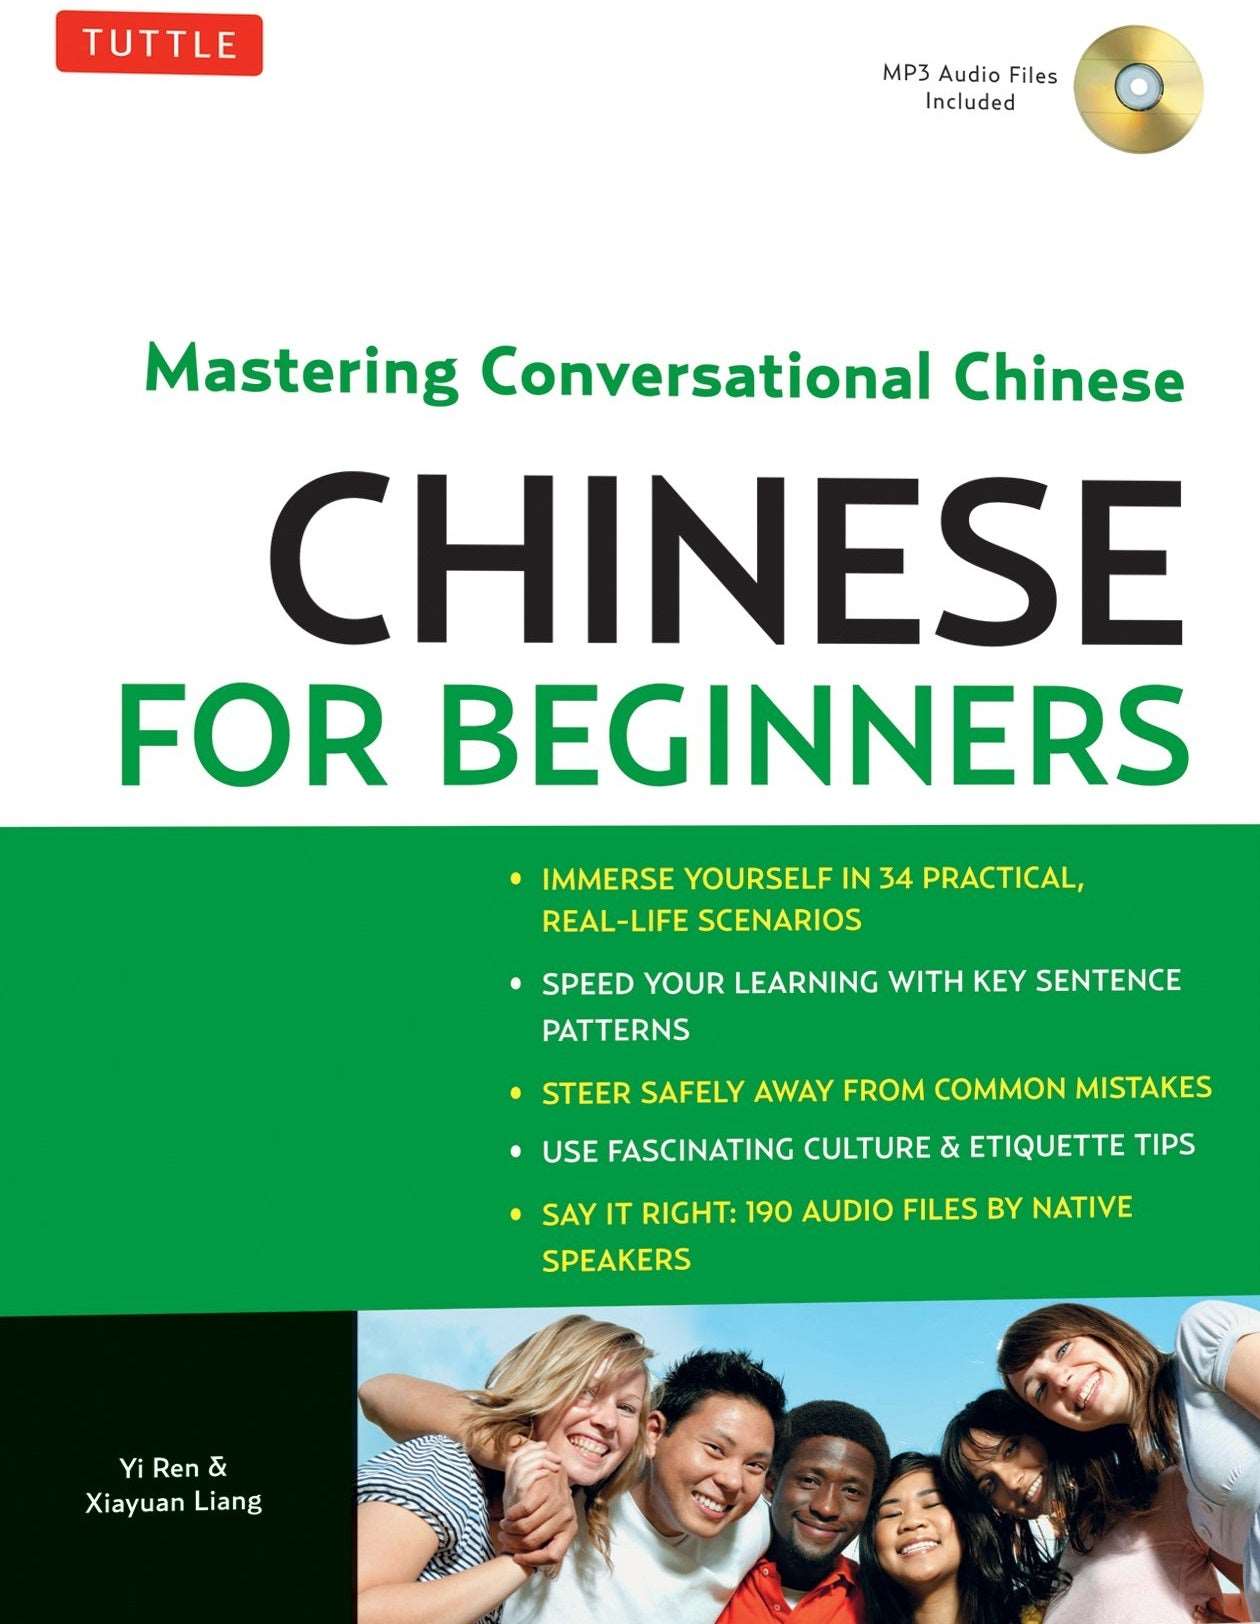 CHINESE FOR BEGINNERS